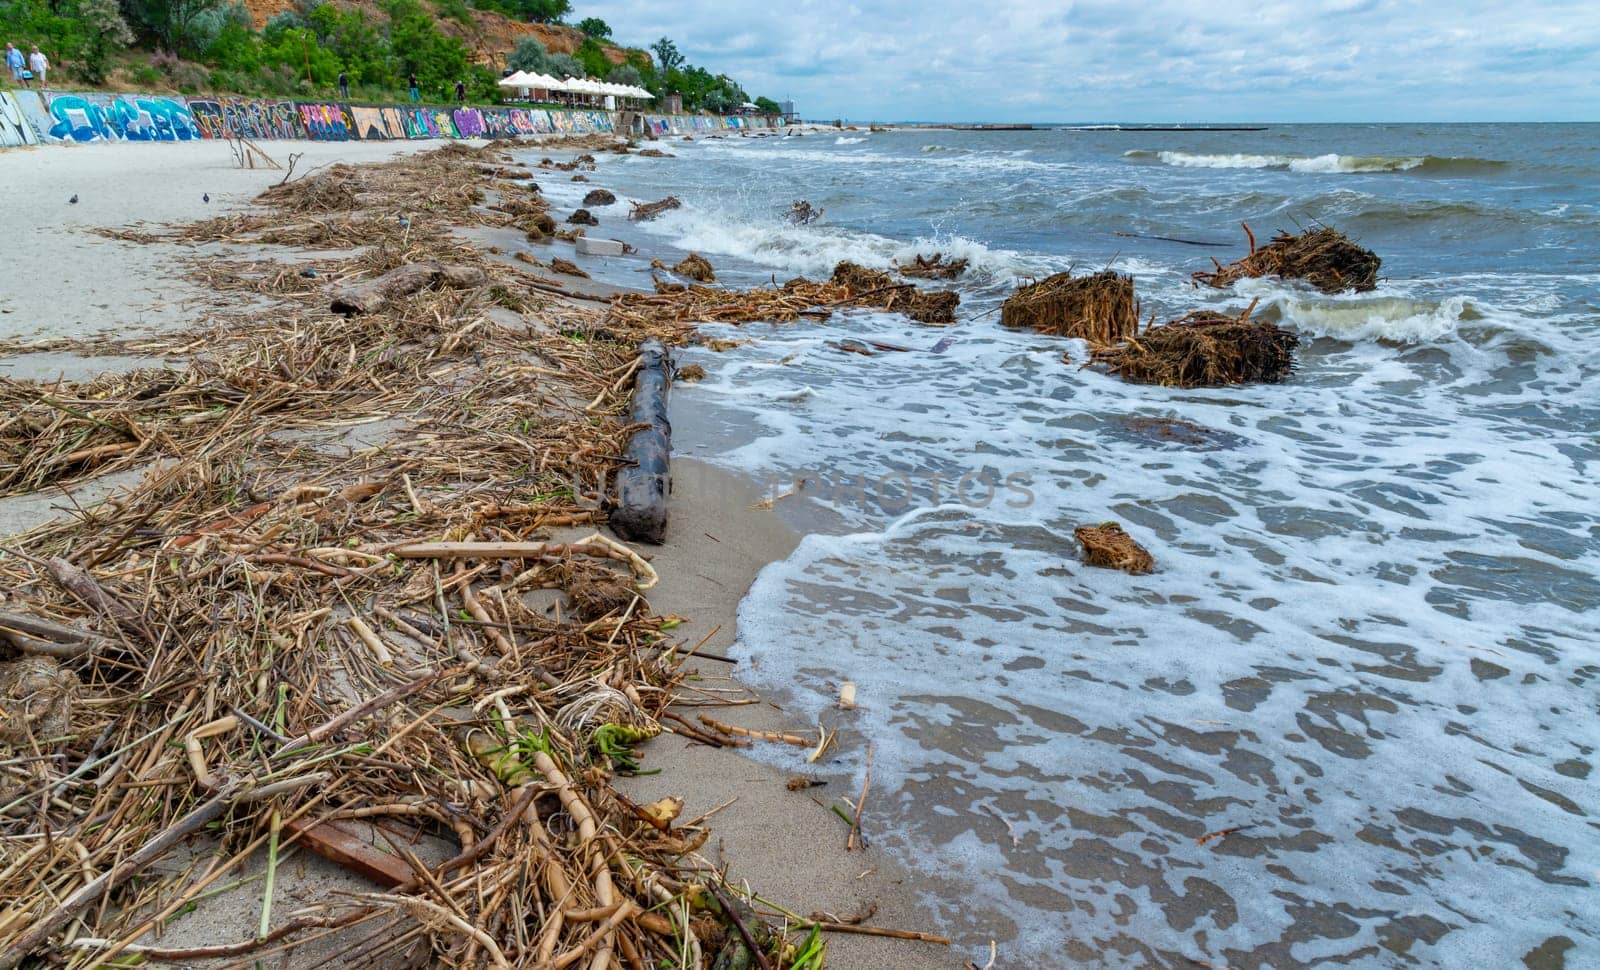 Accident at the Kakhovskaya hydroelectric power station, pollution of beaches with plastic debris and the remains of river plants brought by water by Hydrobiolog